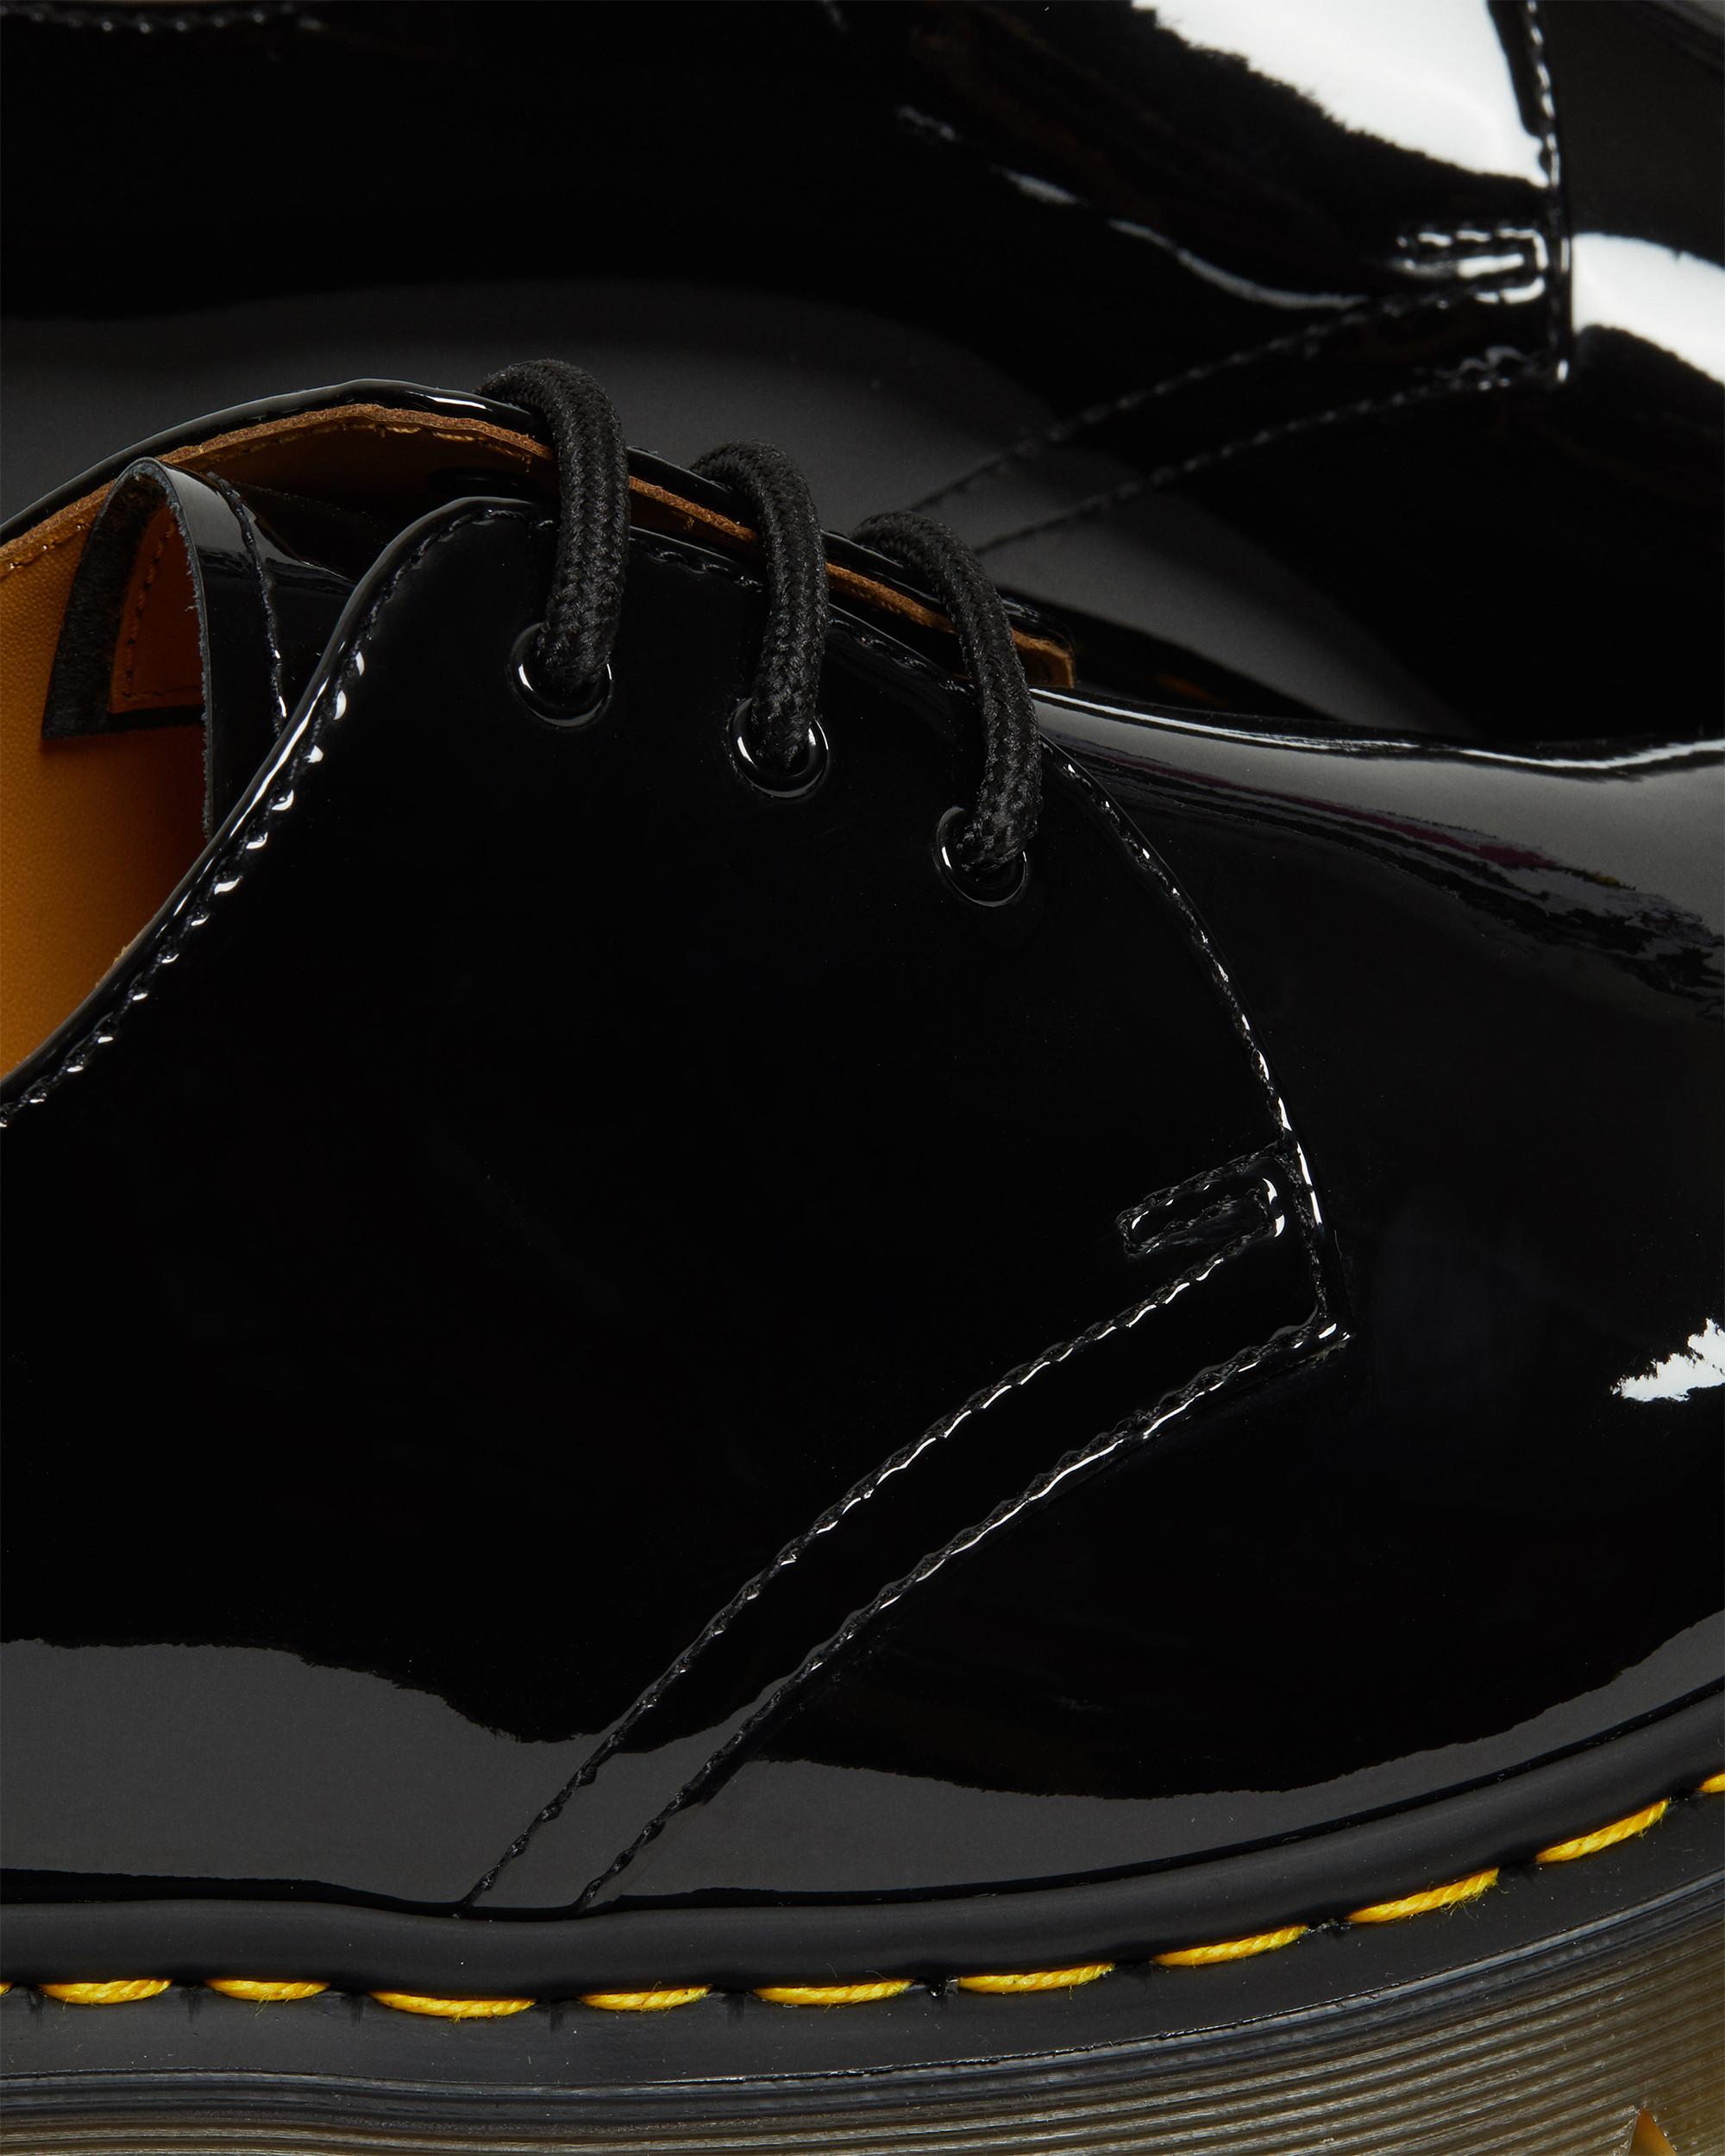 1461 Bex Patent Leather Oxford Shoes | Dr. Martens